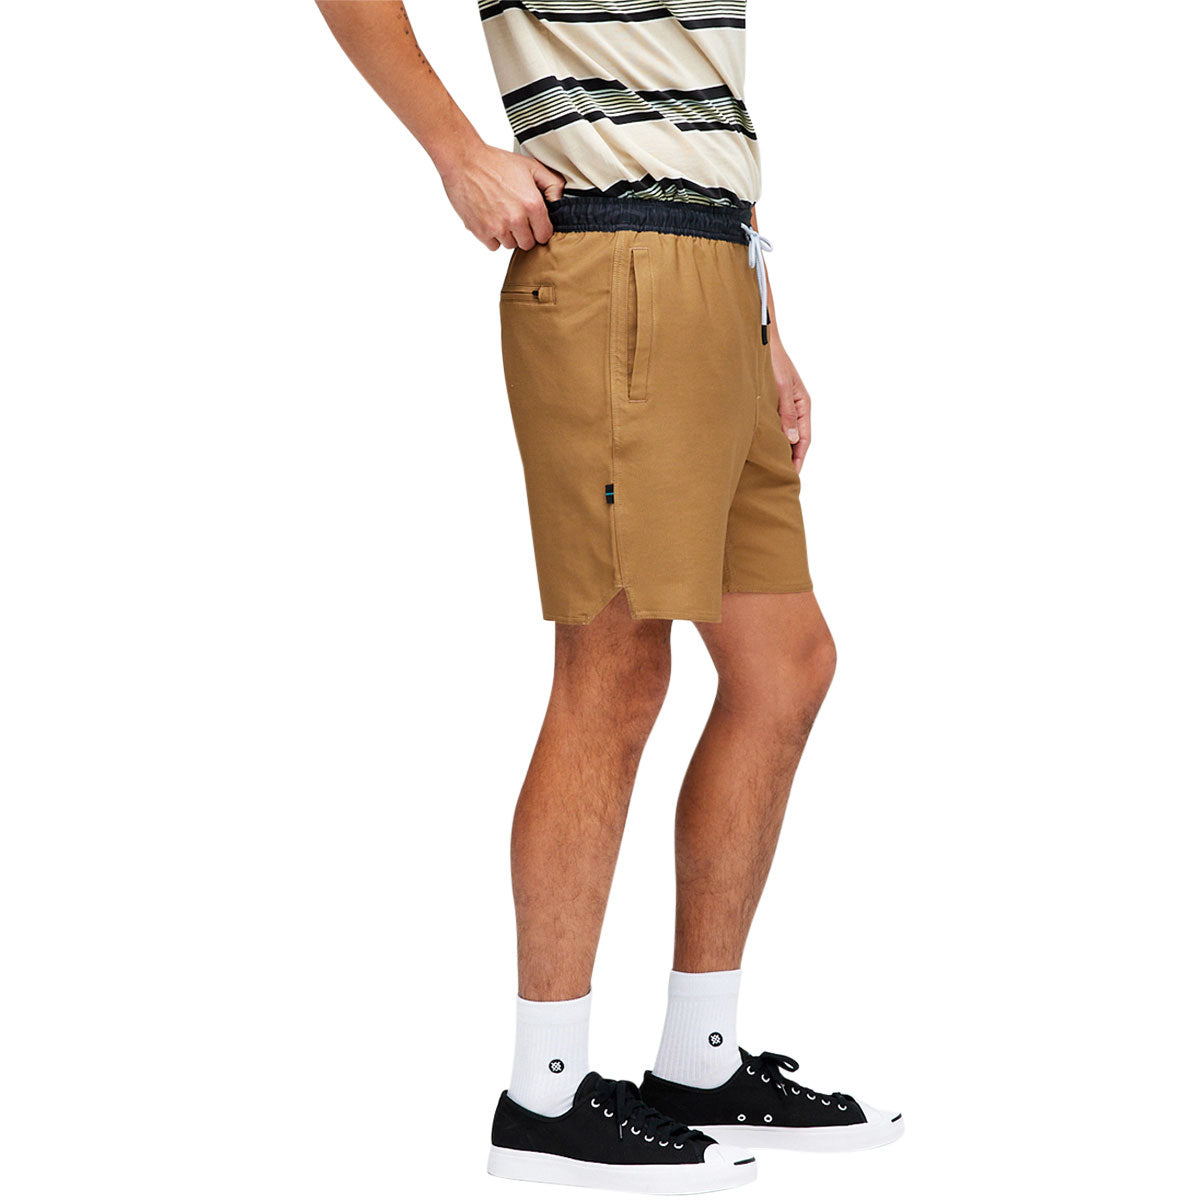 Stance Complex Shorts - Brown image 4